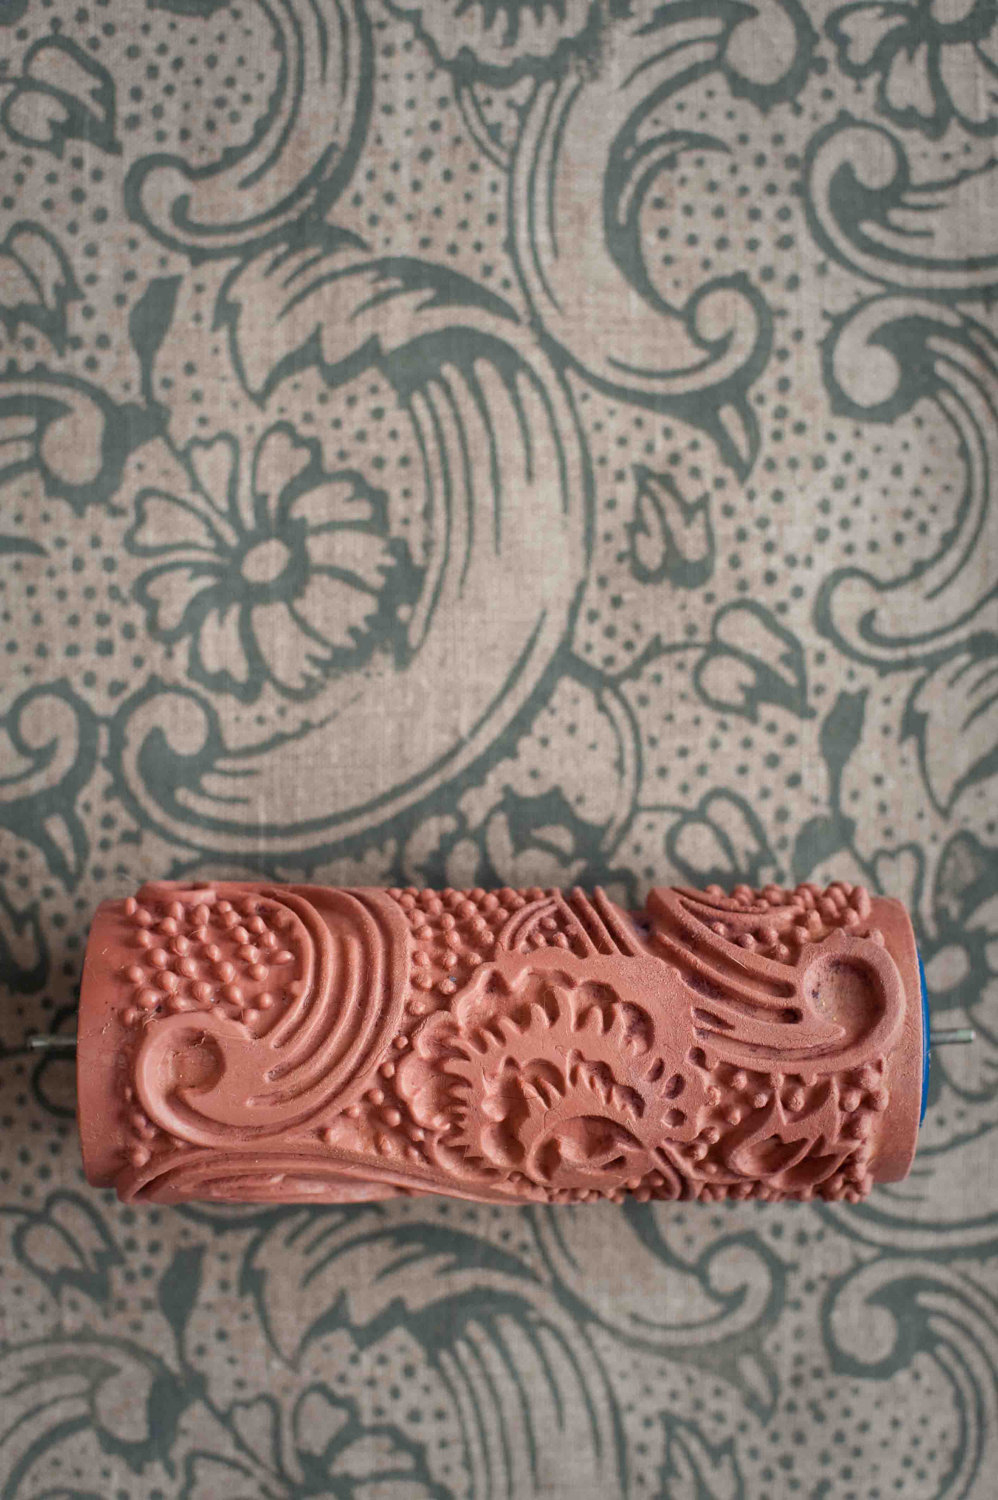 Wallpaper Paint The Roller That Creates A Look